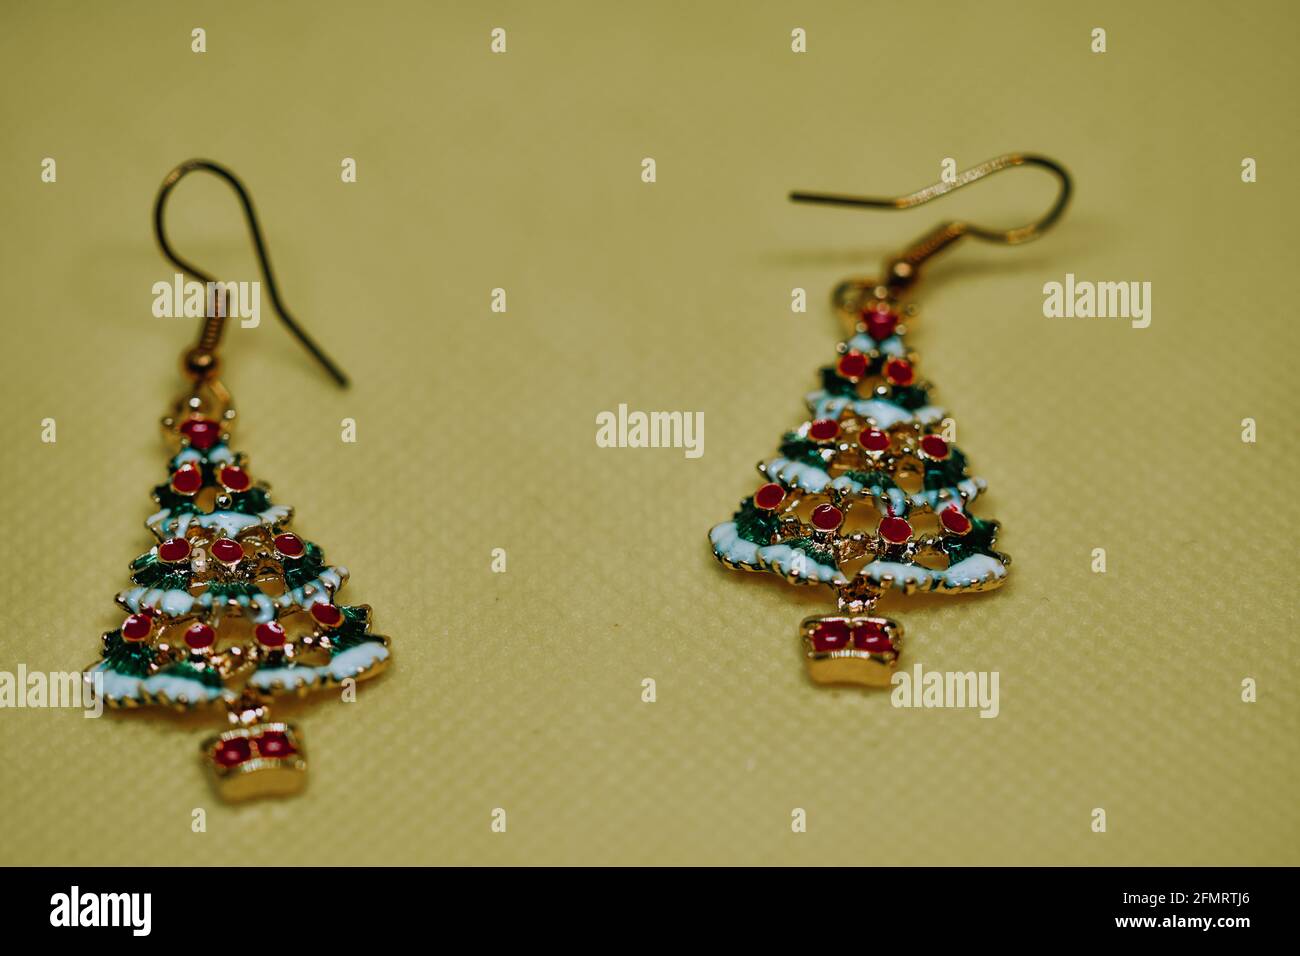 Pair of golden enameled earring in the shape of Christmas trees with ornaments and presents Stock Photo